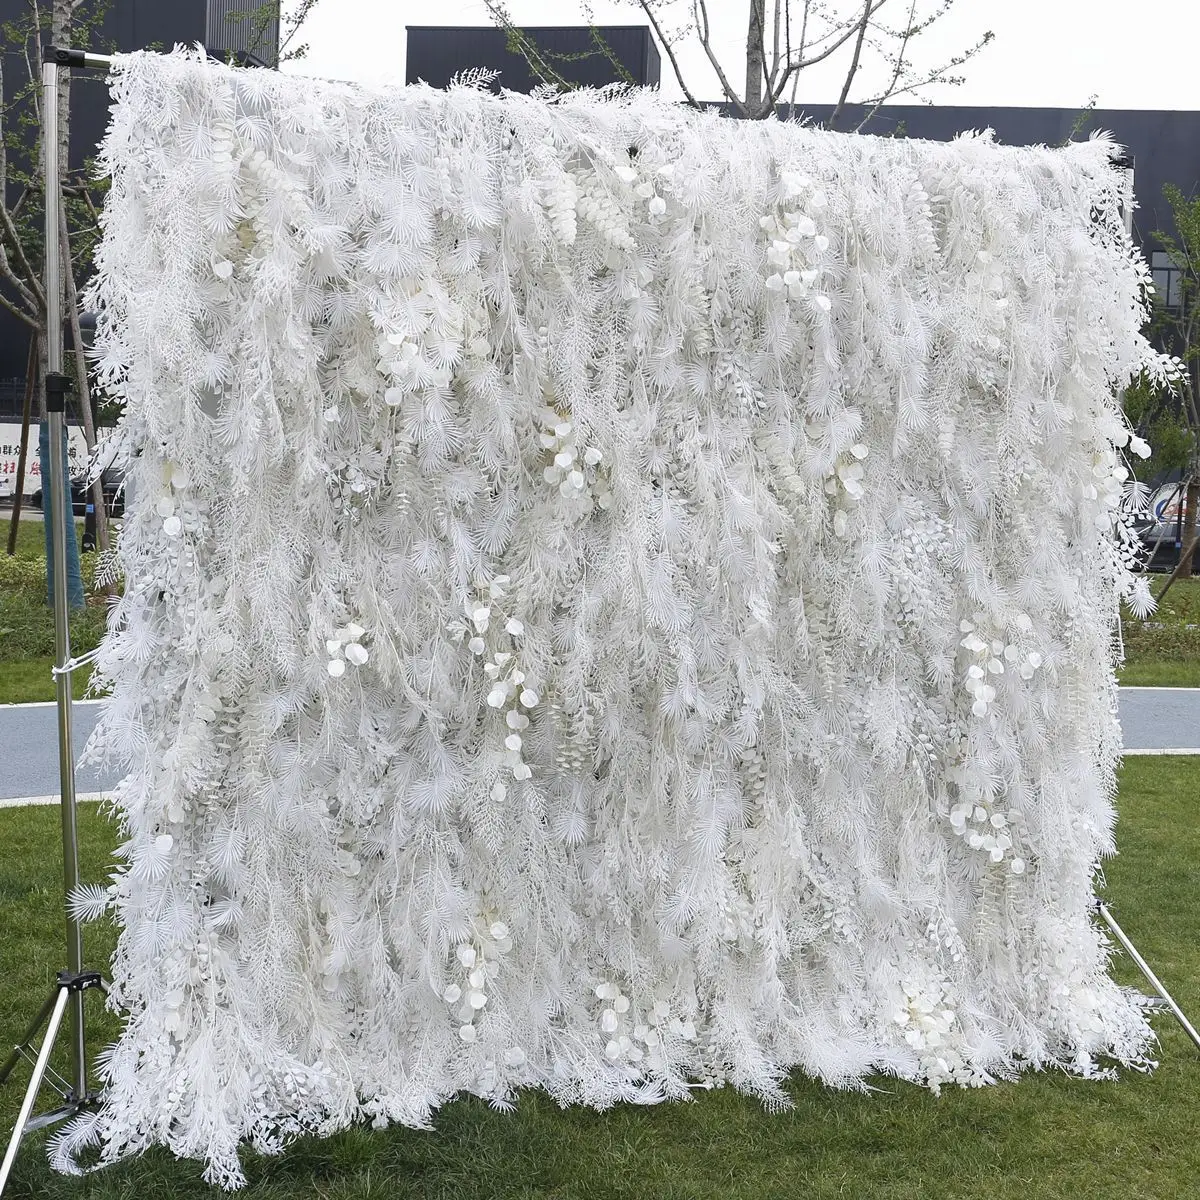 Luxury White Feather Cloth, Pampas Grass Fabric, Roll Up, Reed, Pampas Grass Curtain, Floral Wall, Wedding Backdrop, Party Event